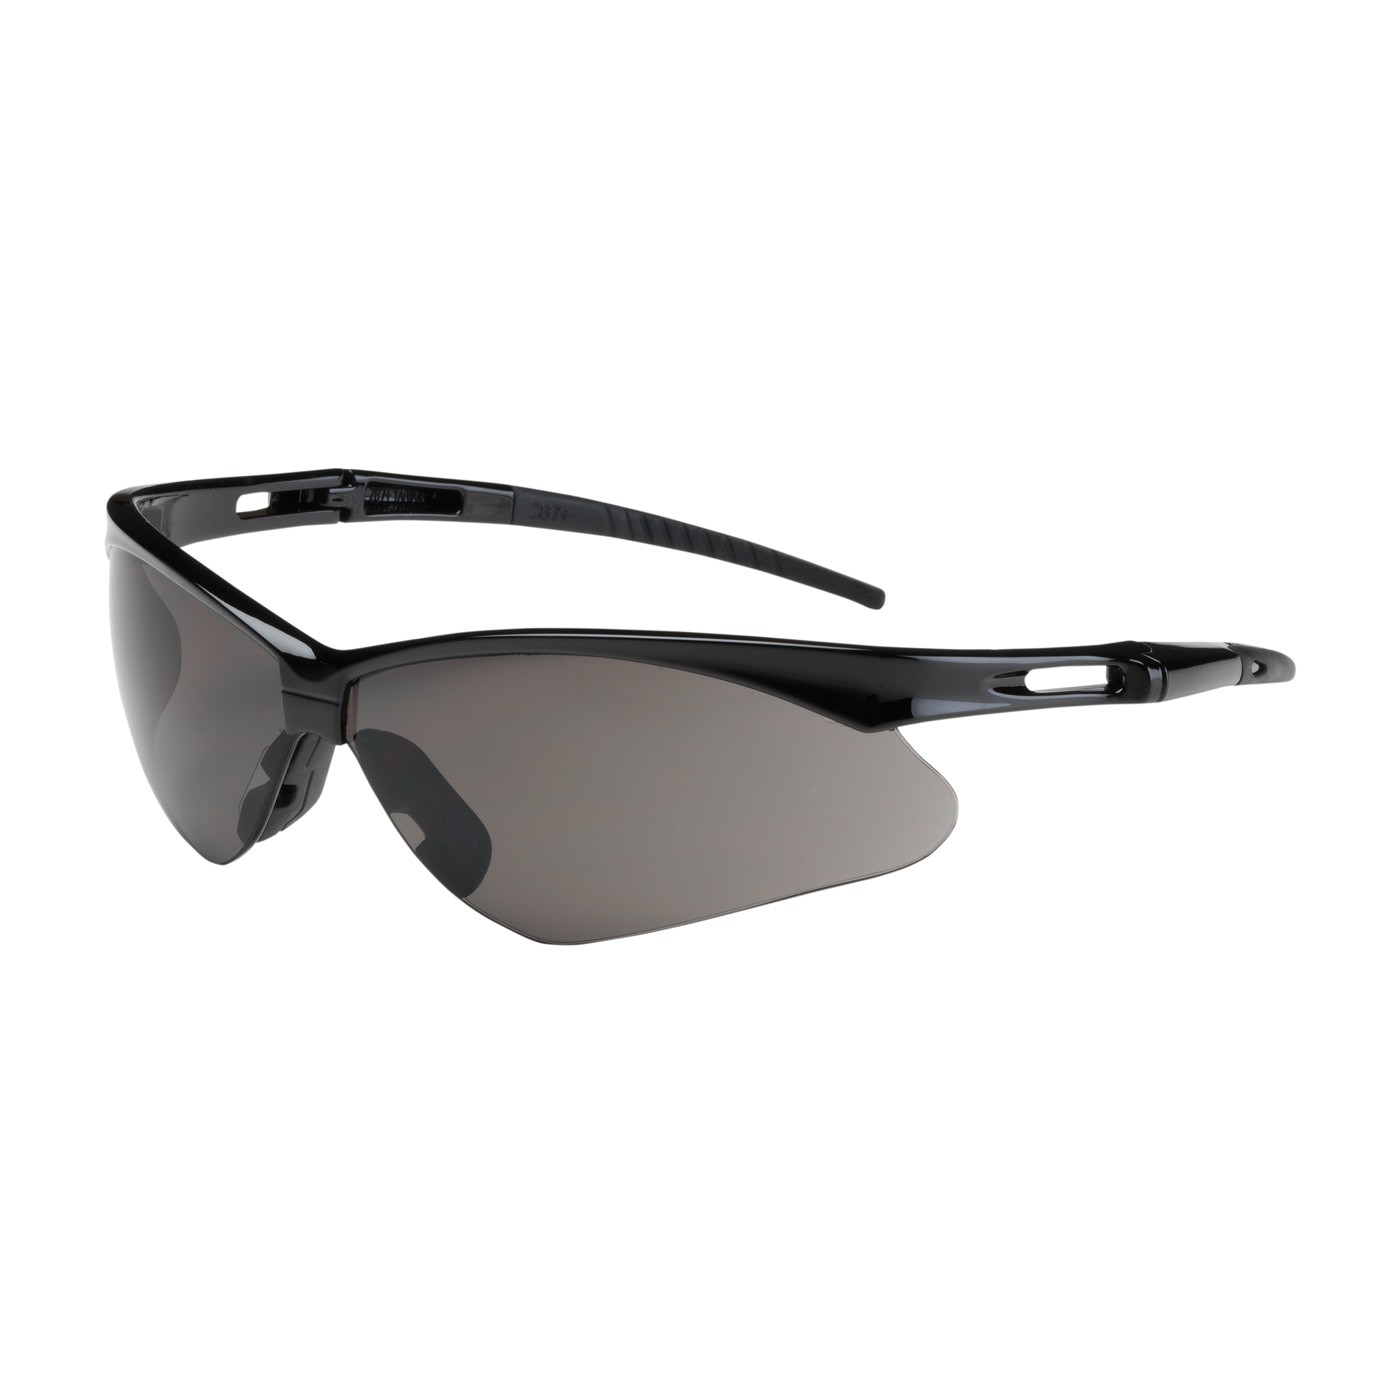 Anser™ Semi-Rimless Safety Glasses with Black Frame, Gray Lens and Anti-Scratch Coating  (#250-AN-10521)